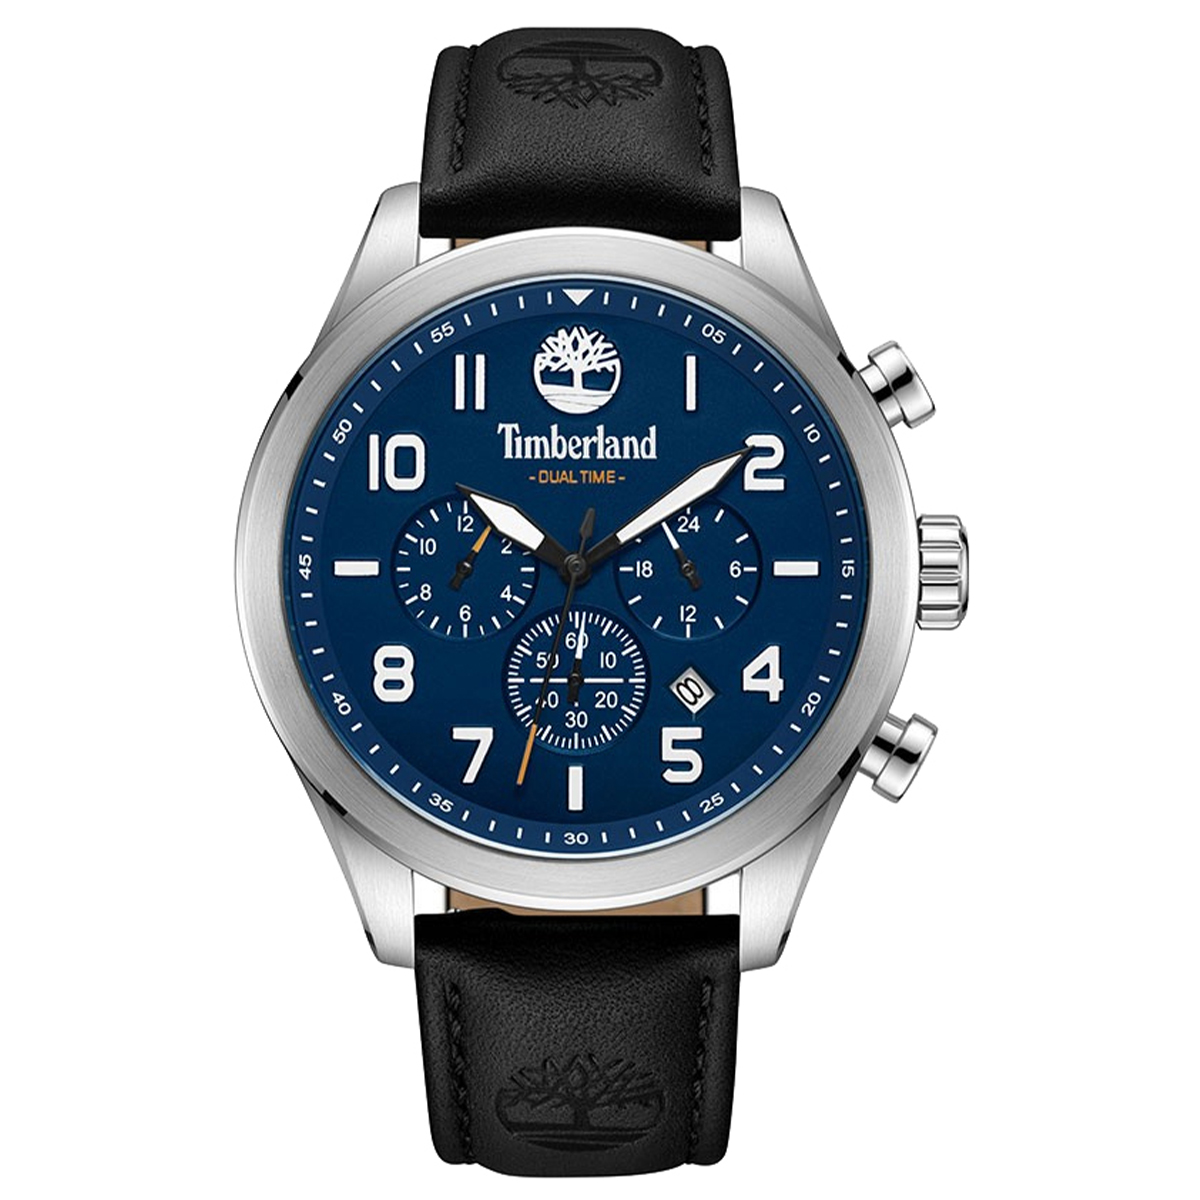 MONTRE TIMBERLAND HOMME CHRONO CUIR